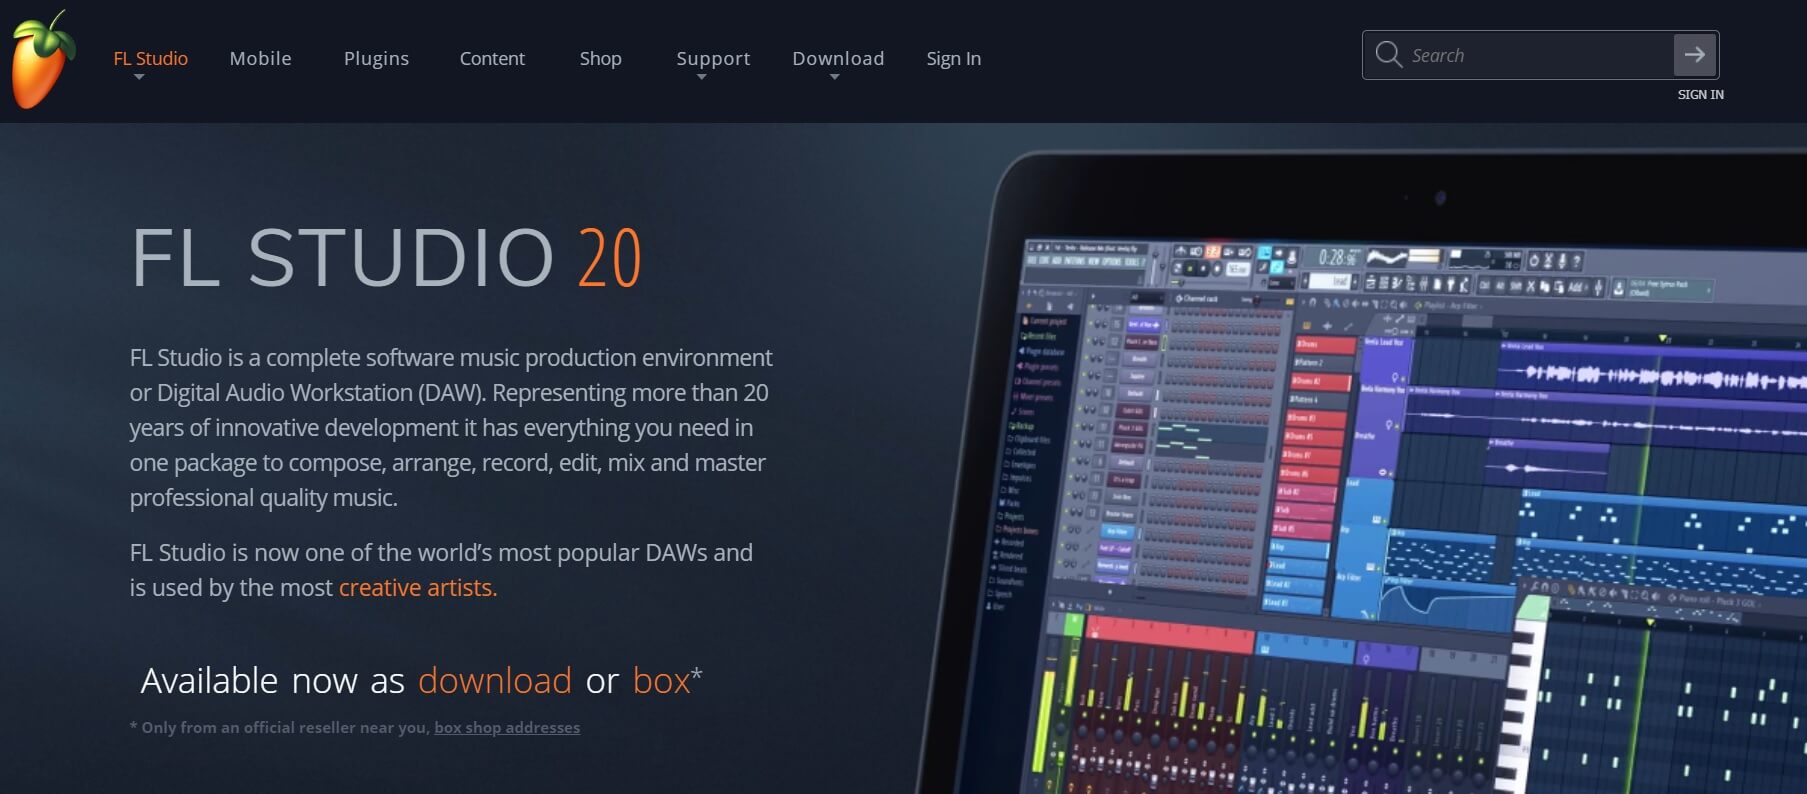 FL Studio | Top Music Production Software For PC Users